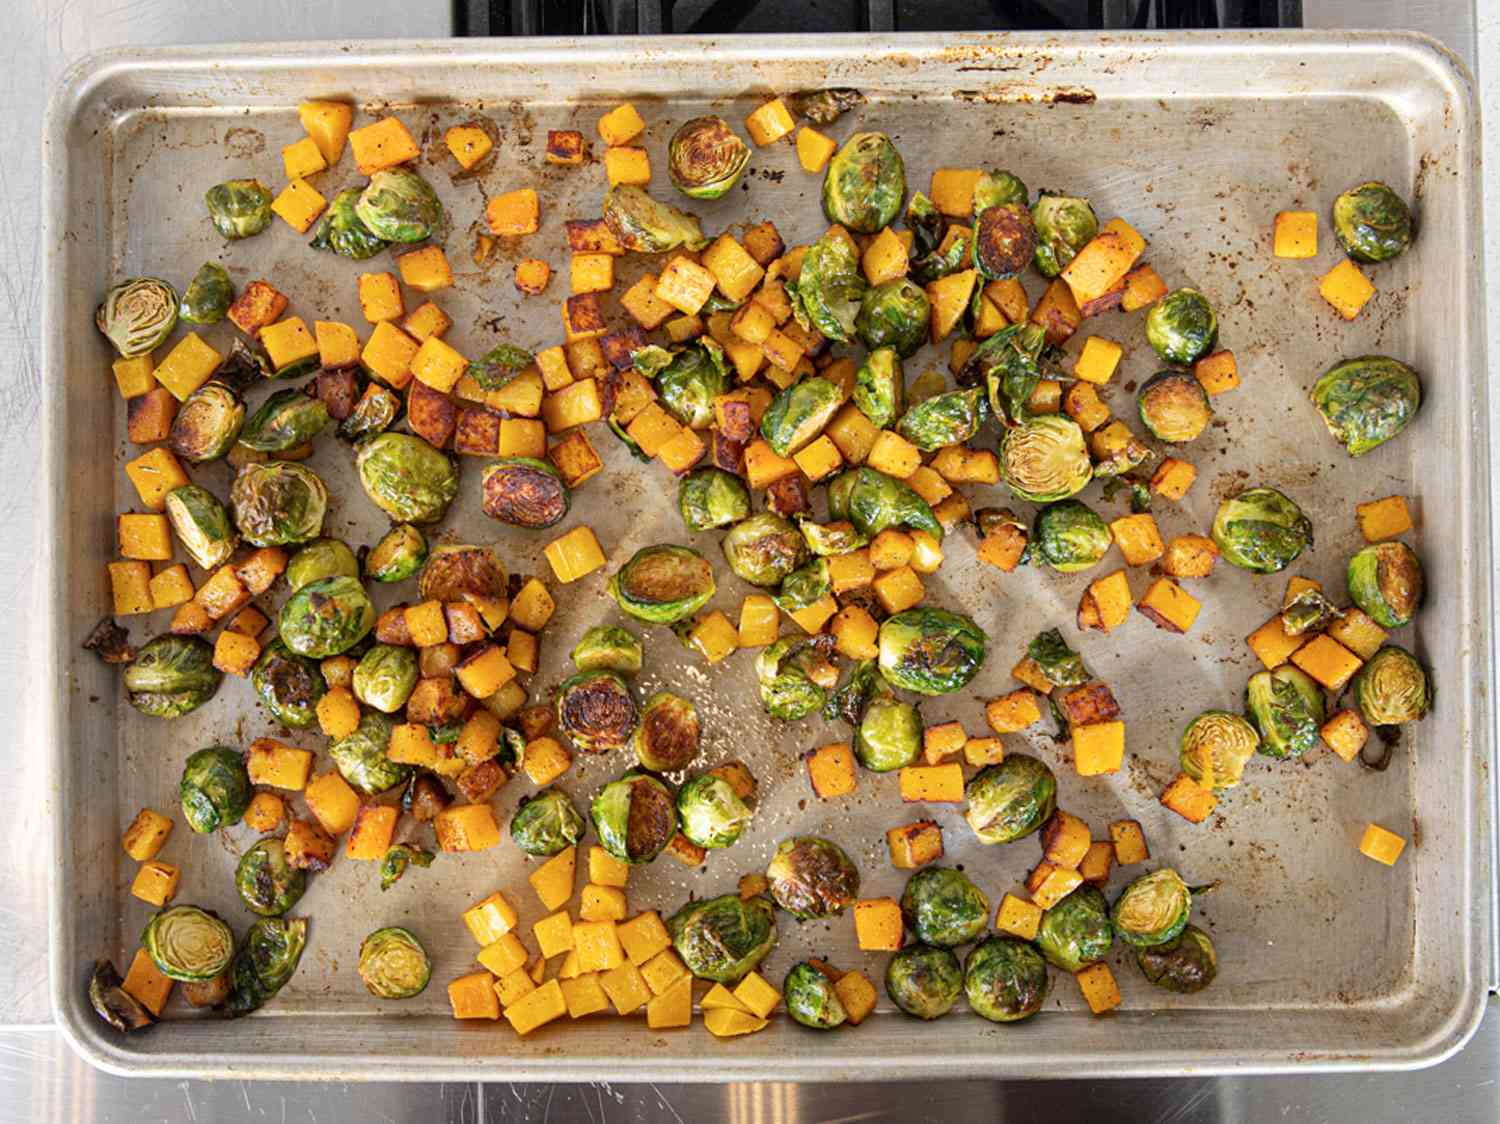 Roasted brussel sprouts and butternut squash on a baking sheet